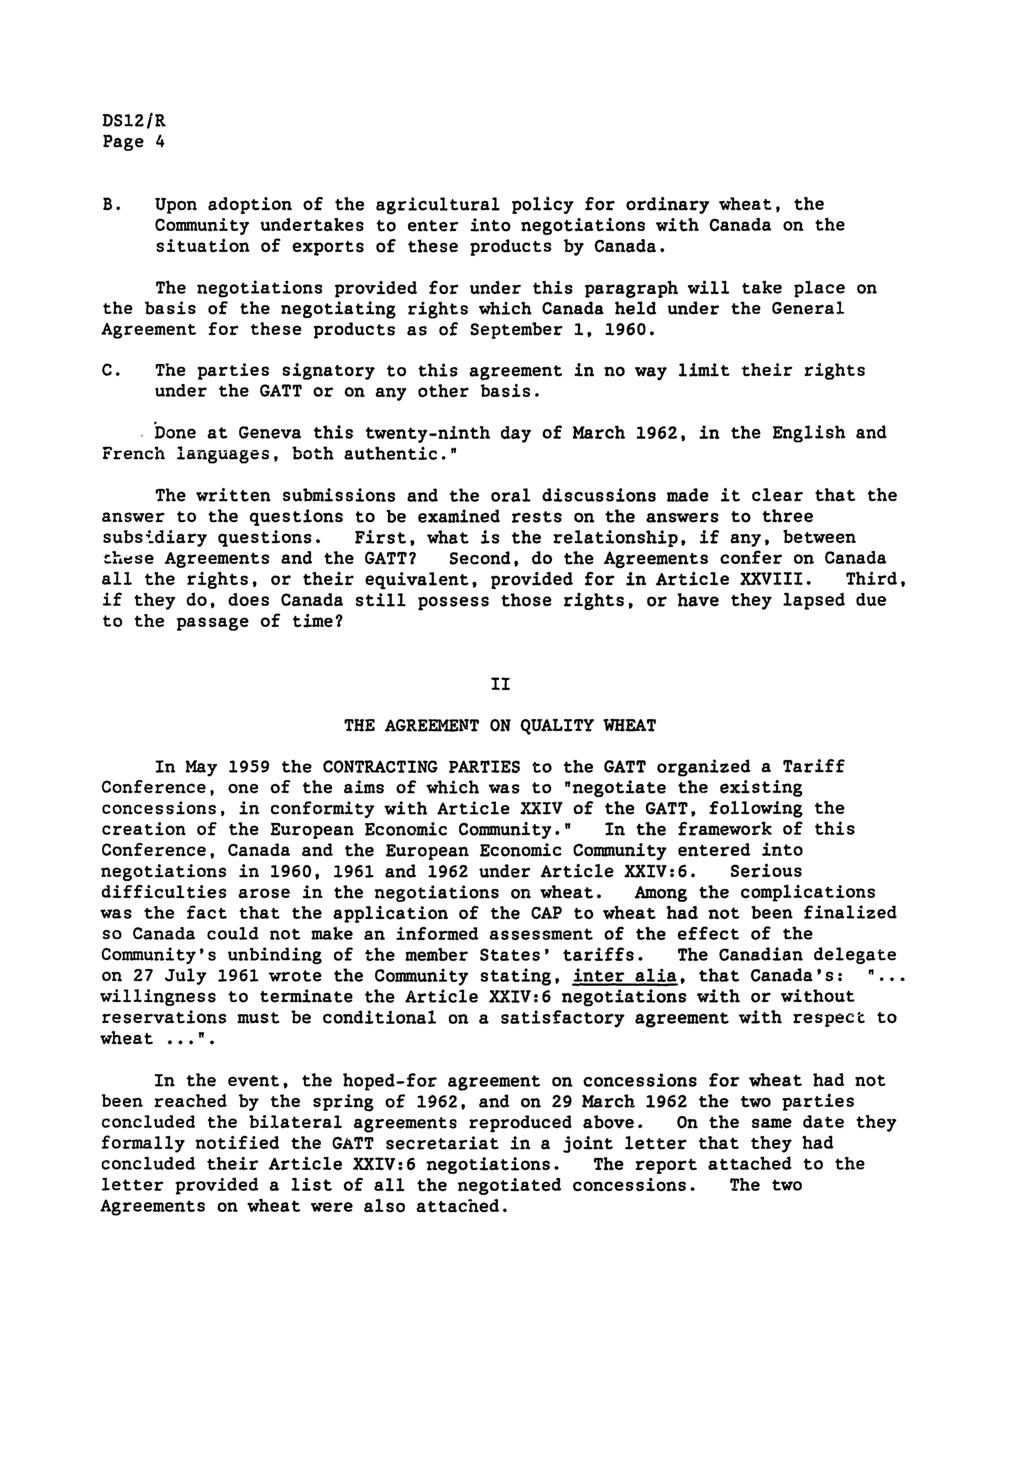 Page 4 B. Upon adoption of the agricultural policy for ordinary wheat, the Community undertakes to enter into negotiations with Canada on the situation of exports of these products by Canada.